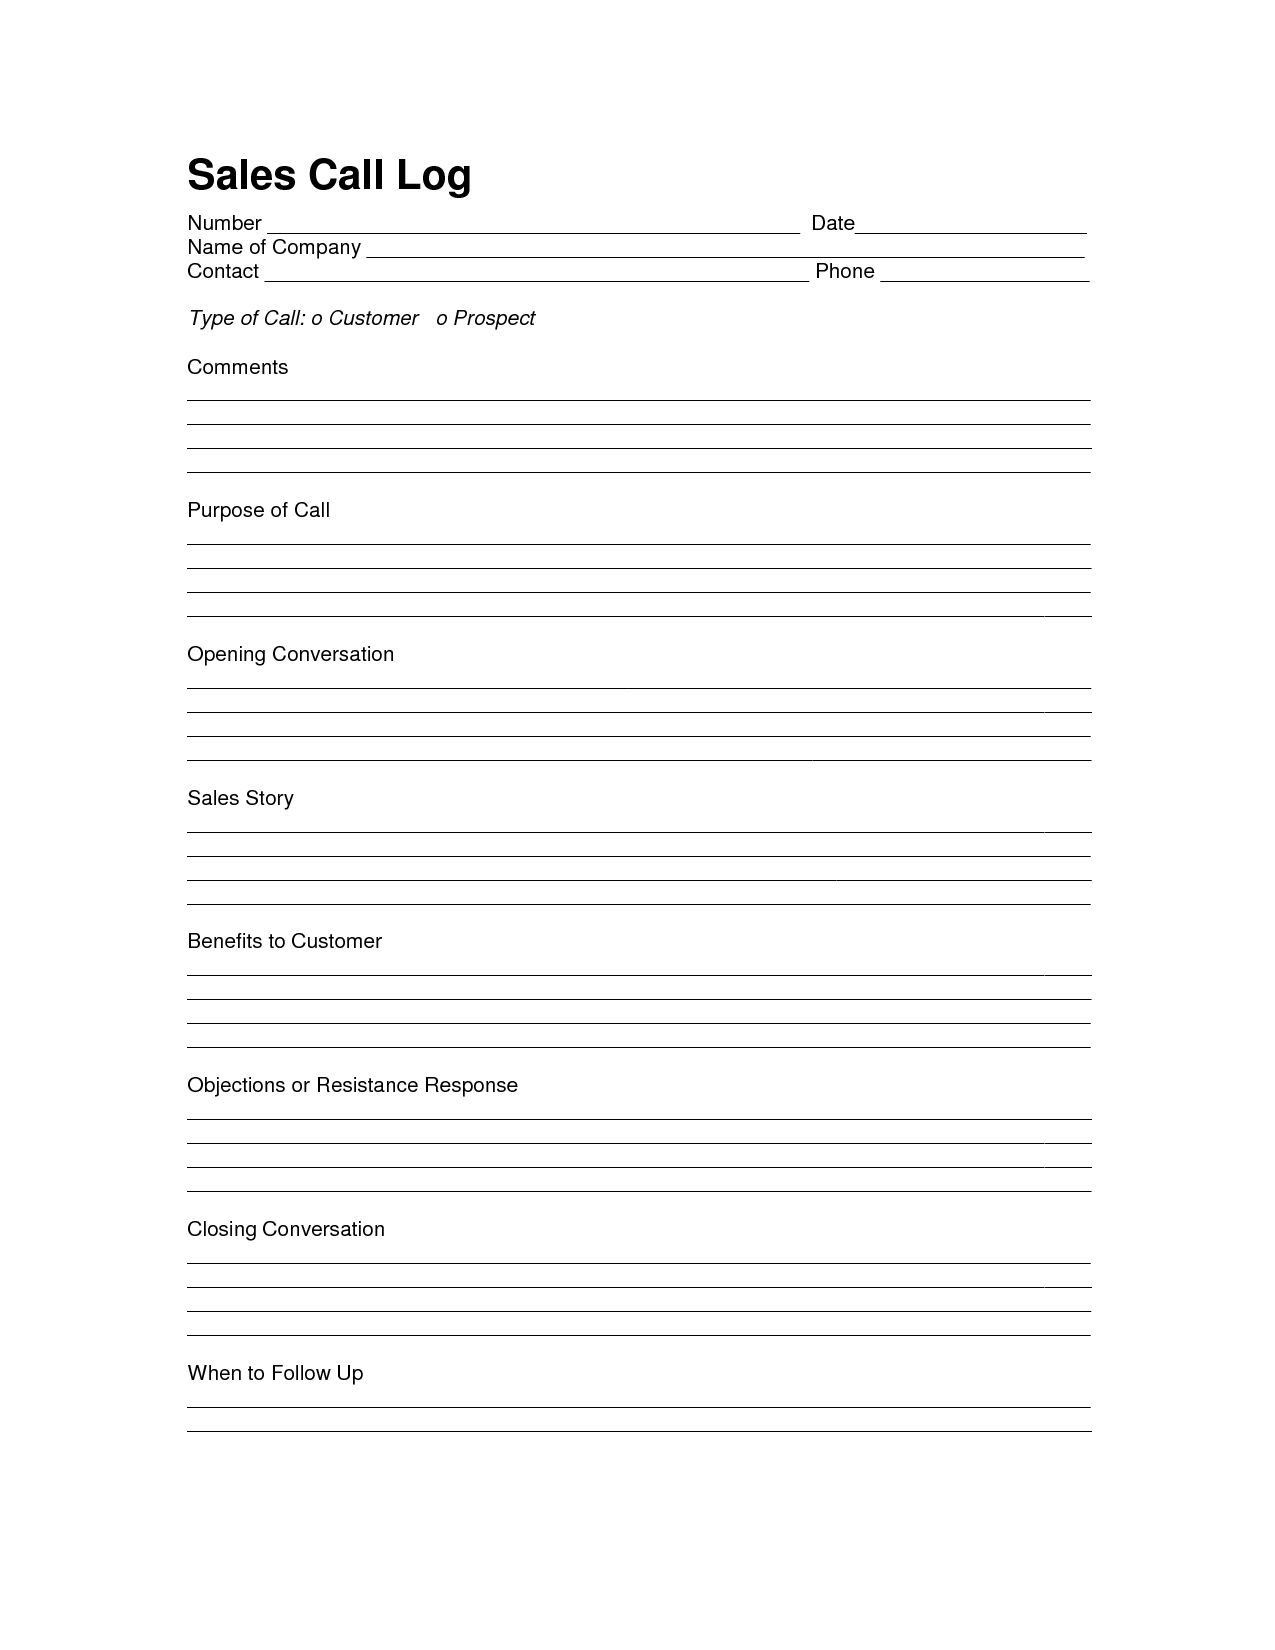 Sales Log Sheet Template | Sales Call Log Template | Sales In Customer Contact Report Template